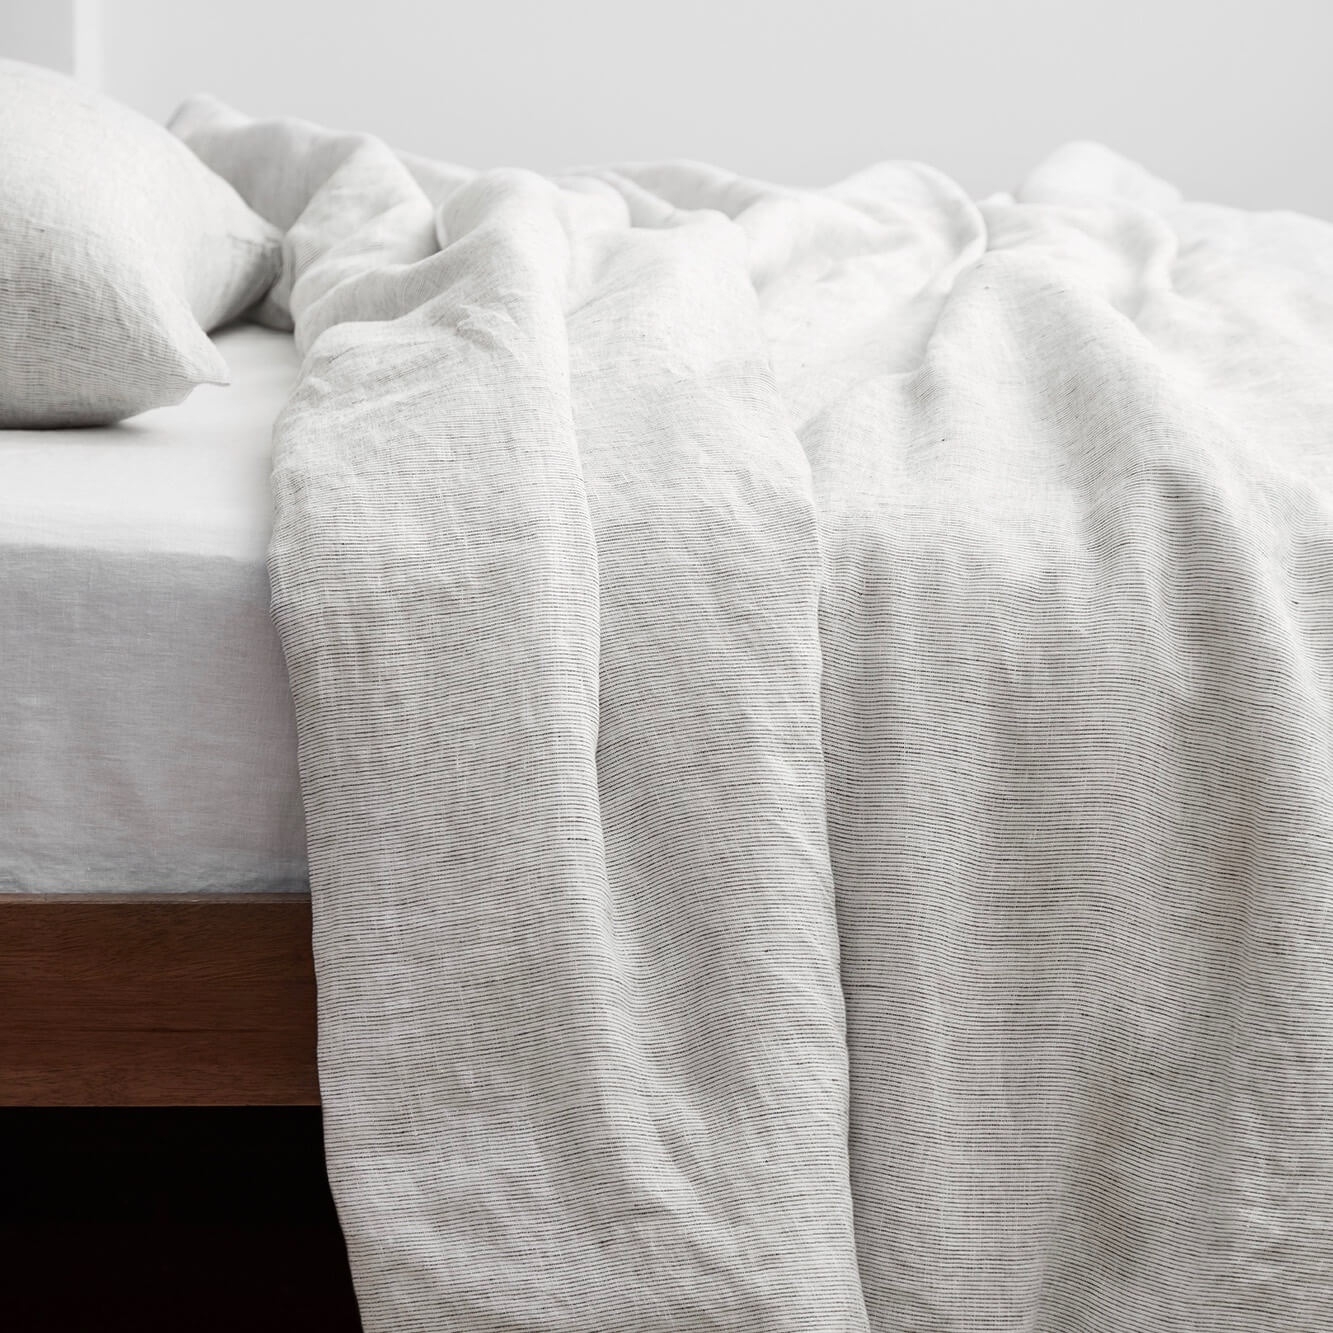 The Citizenry Stonewashed Linen Duvet Cover | Full/Queen | Duvet Only | Sienna - Image 1